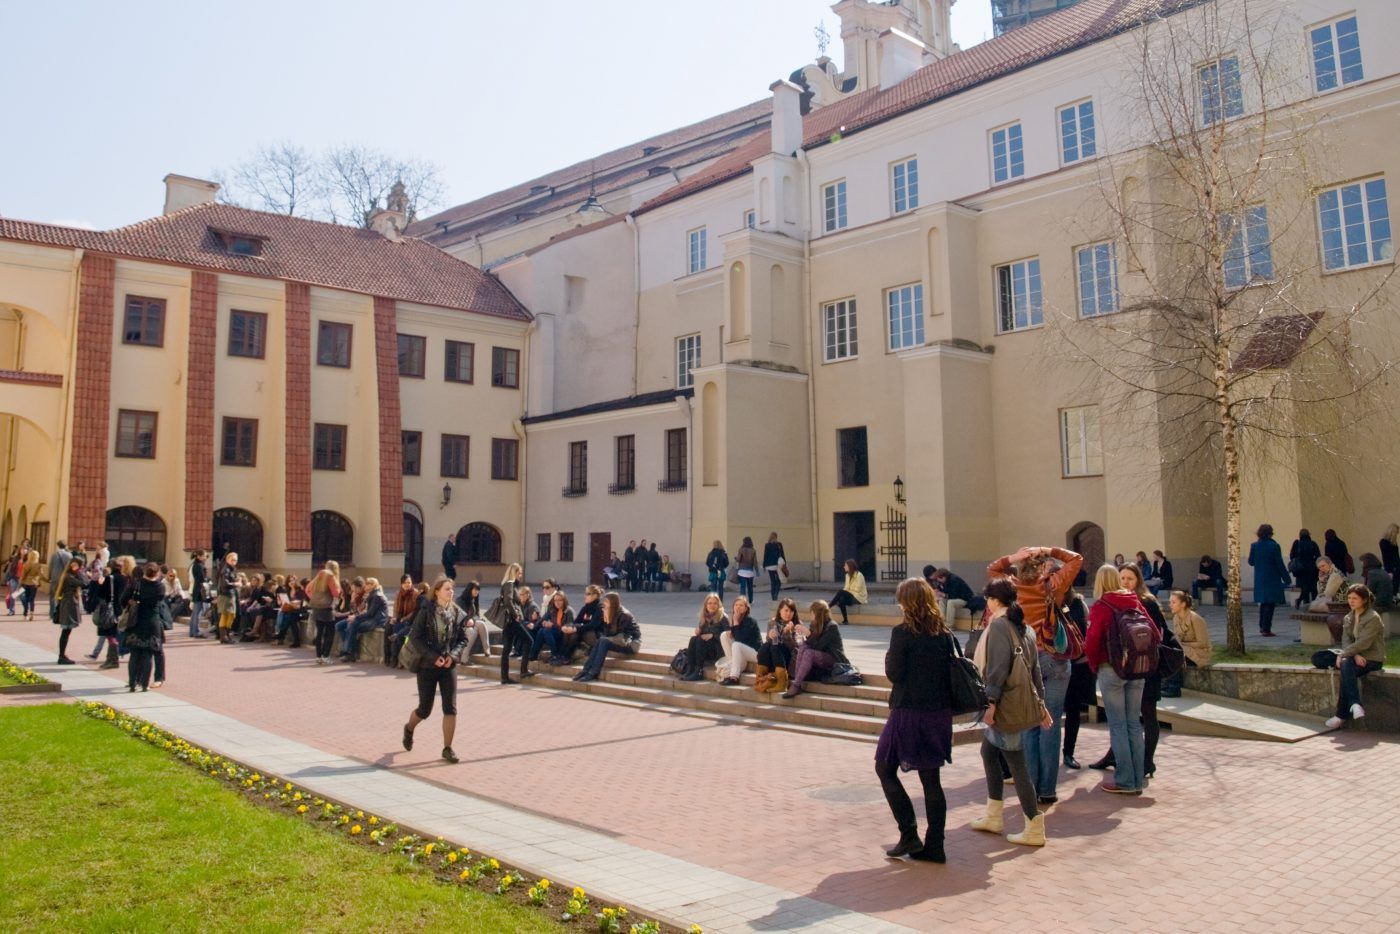 Students in front of buildings on the EHU campus.